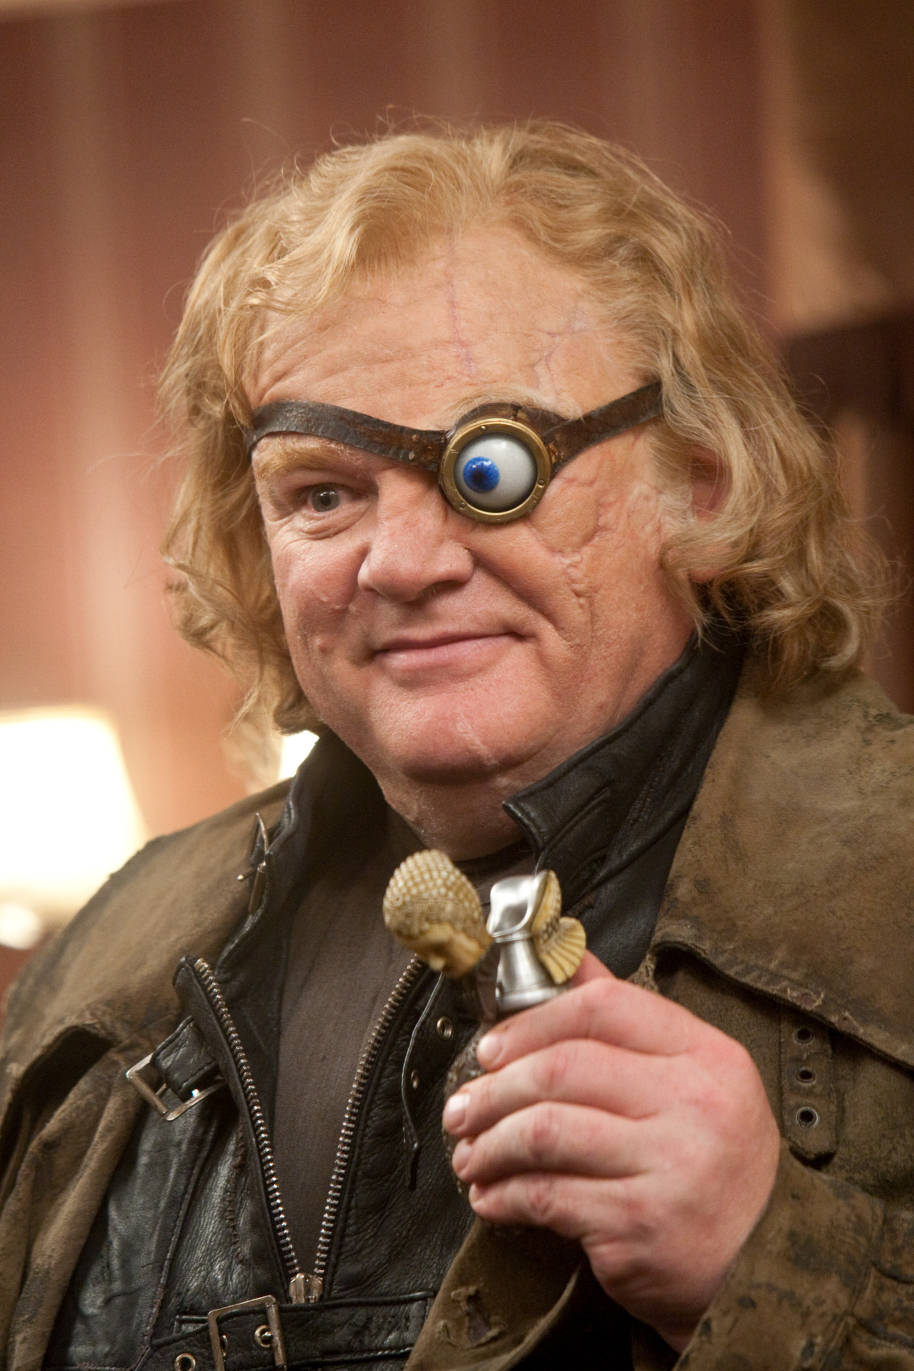 HP-F7-deathly-hallows-part-one-mad-eye-moody-smiling-privet-drive-web-portrait